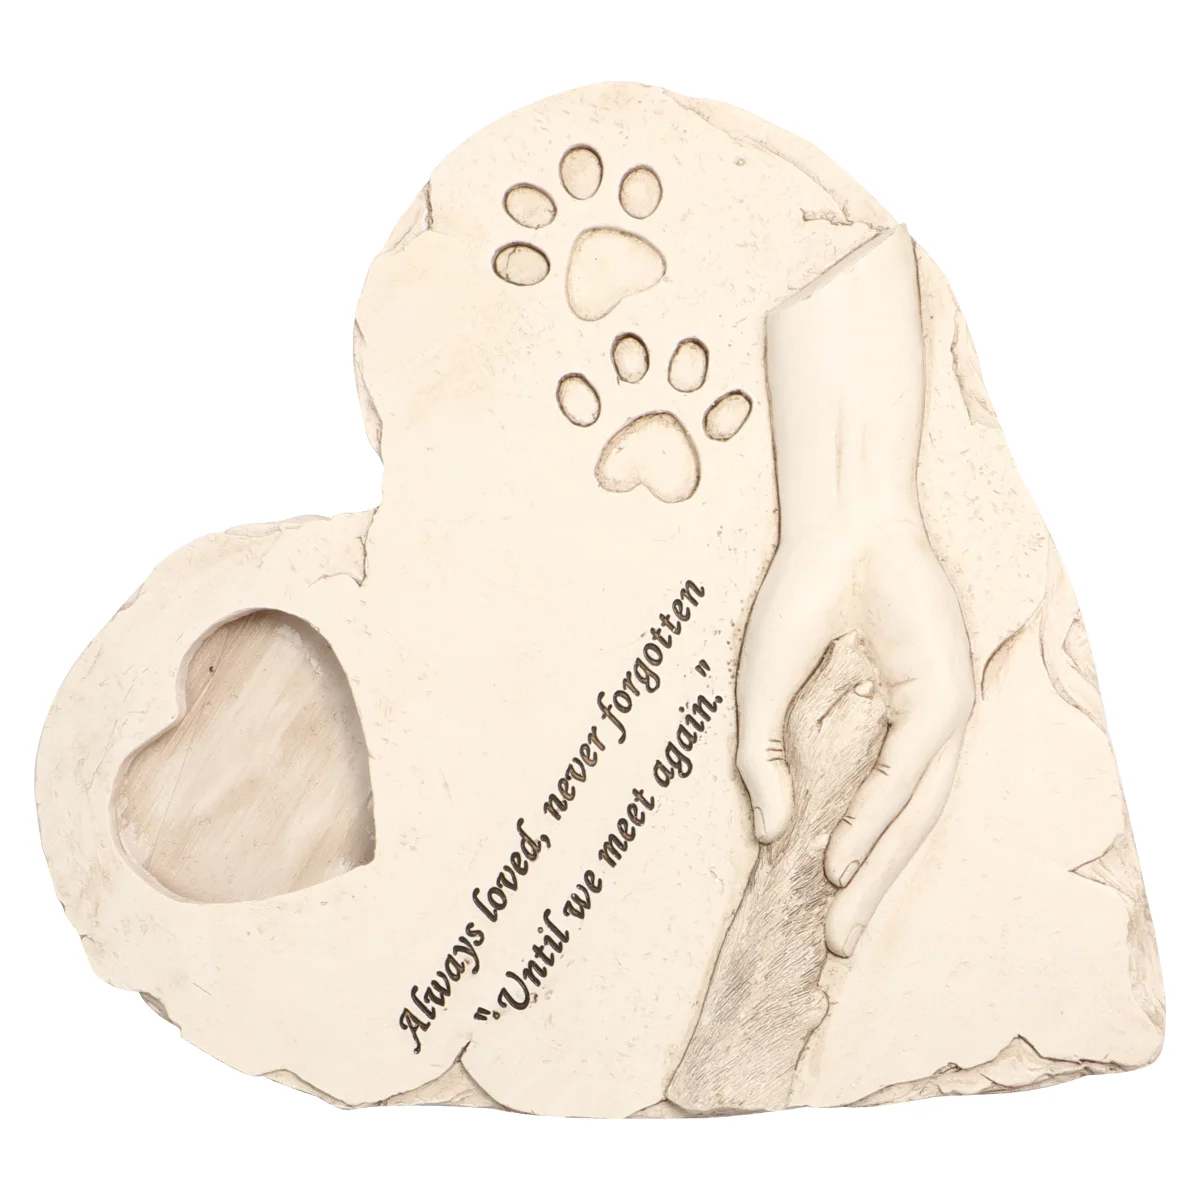 

Pet Dog Memorial Frame Garden Stones Cat Grave Picture Gifts Photo Gift Loss Remembrance Heart Marker Tombstone Paw Stone